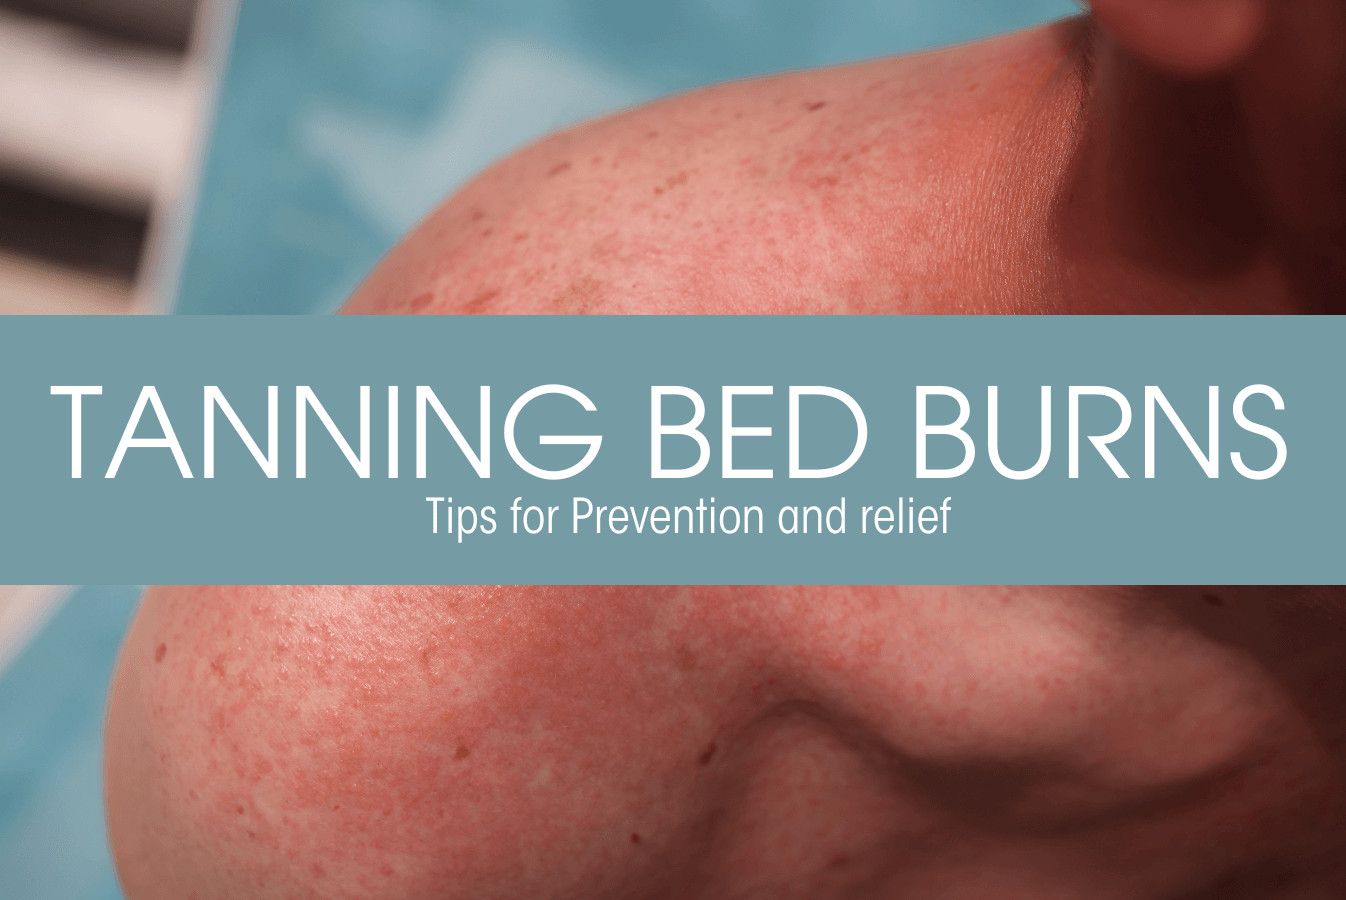 Featured image of a man with tanning bed burn